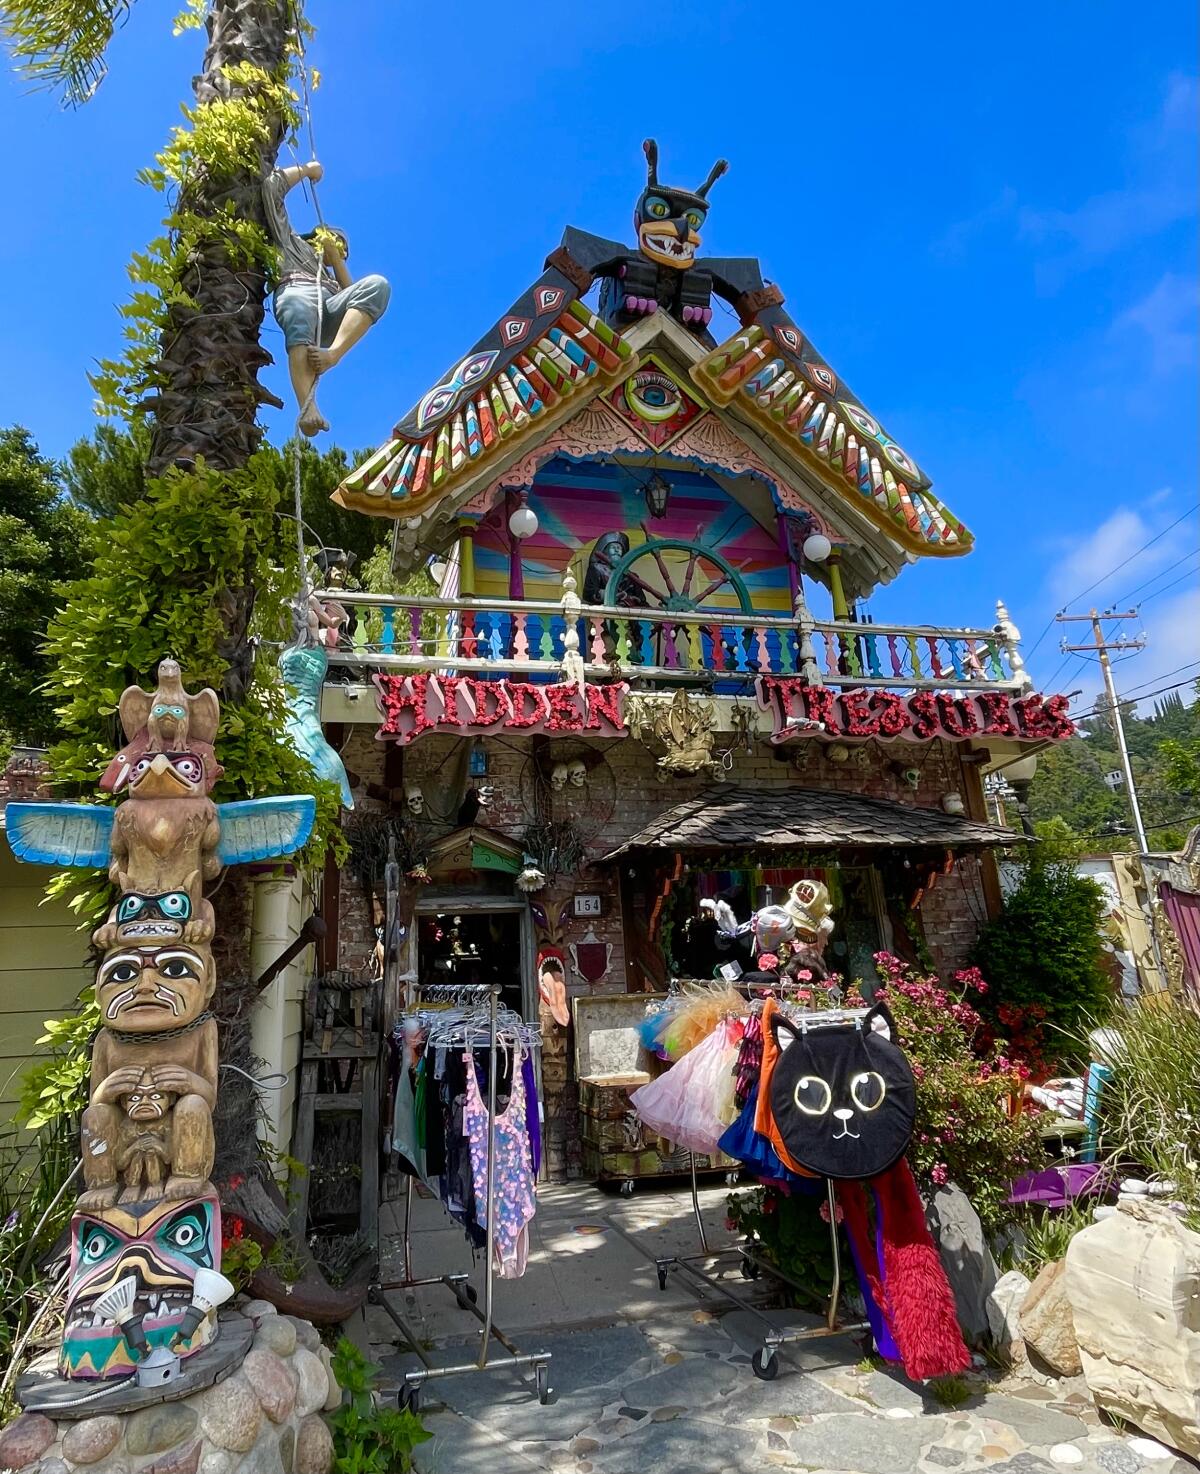 A kitschy storefront with a totem pole and colorful decorations.